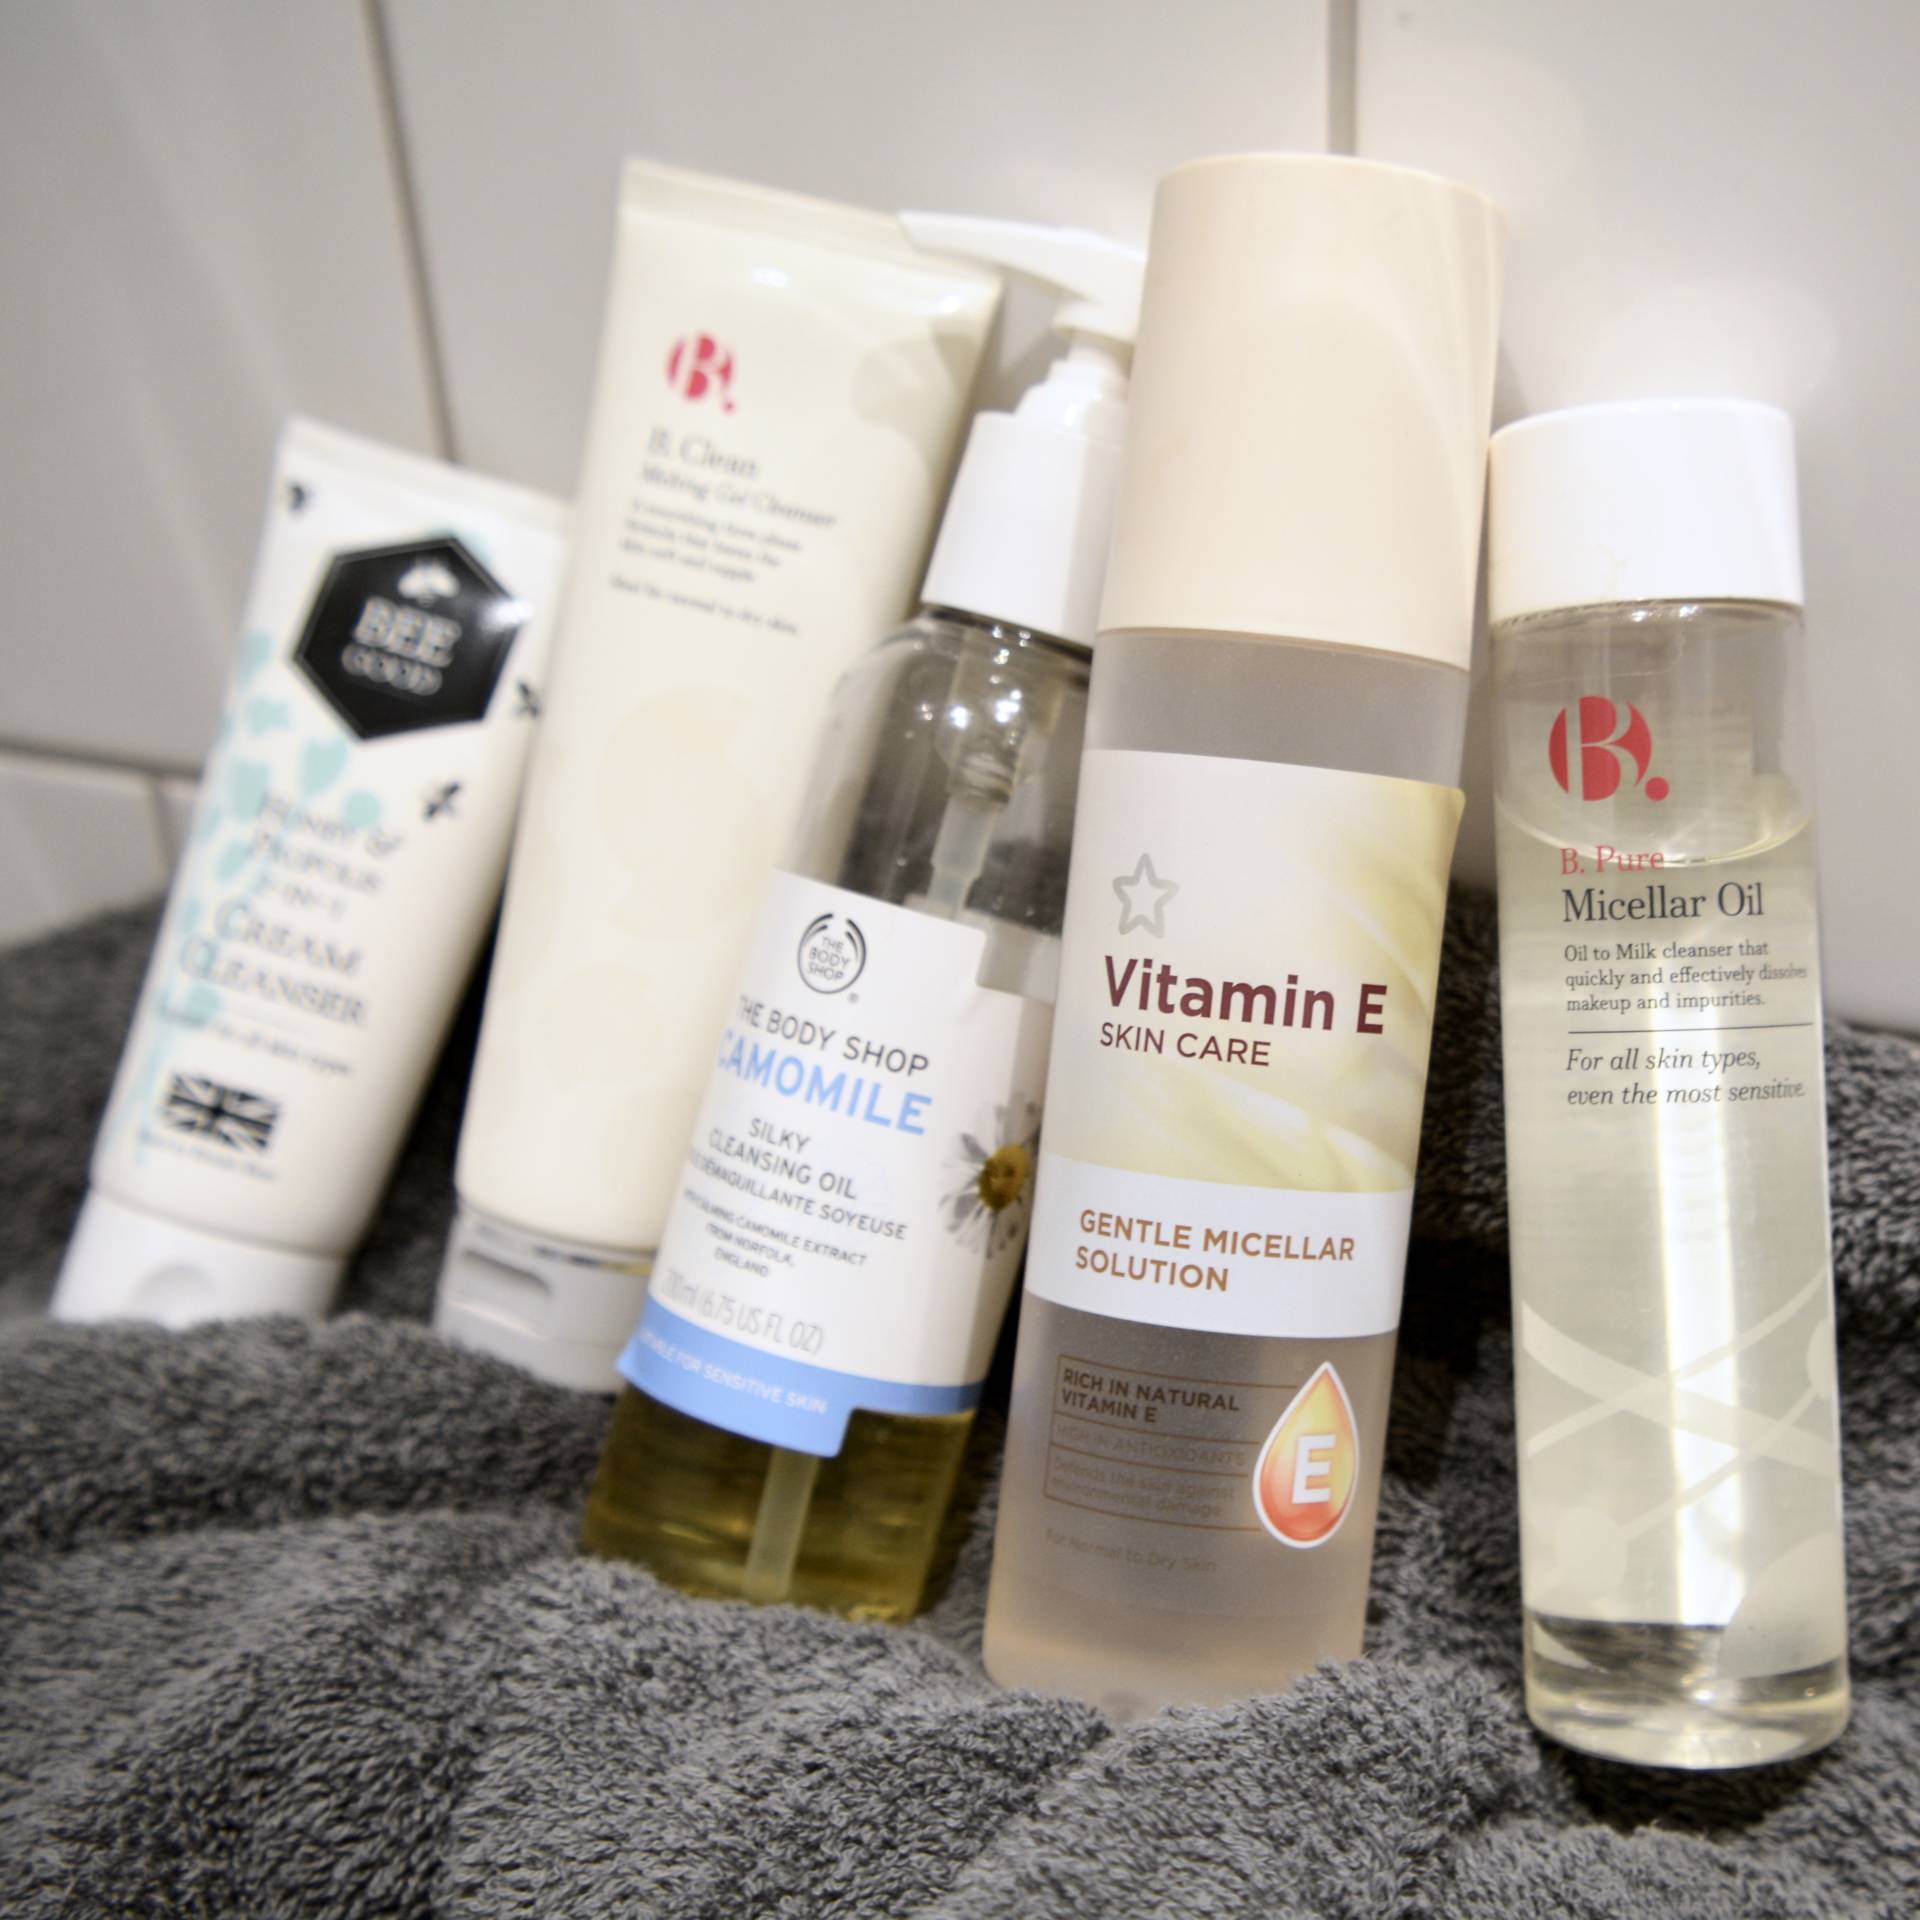 5 best budget cleansers for sensitive skin - Superdrug Vitamin E Micellar Water // Talonted Lex